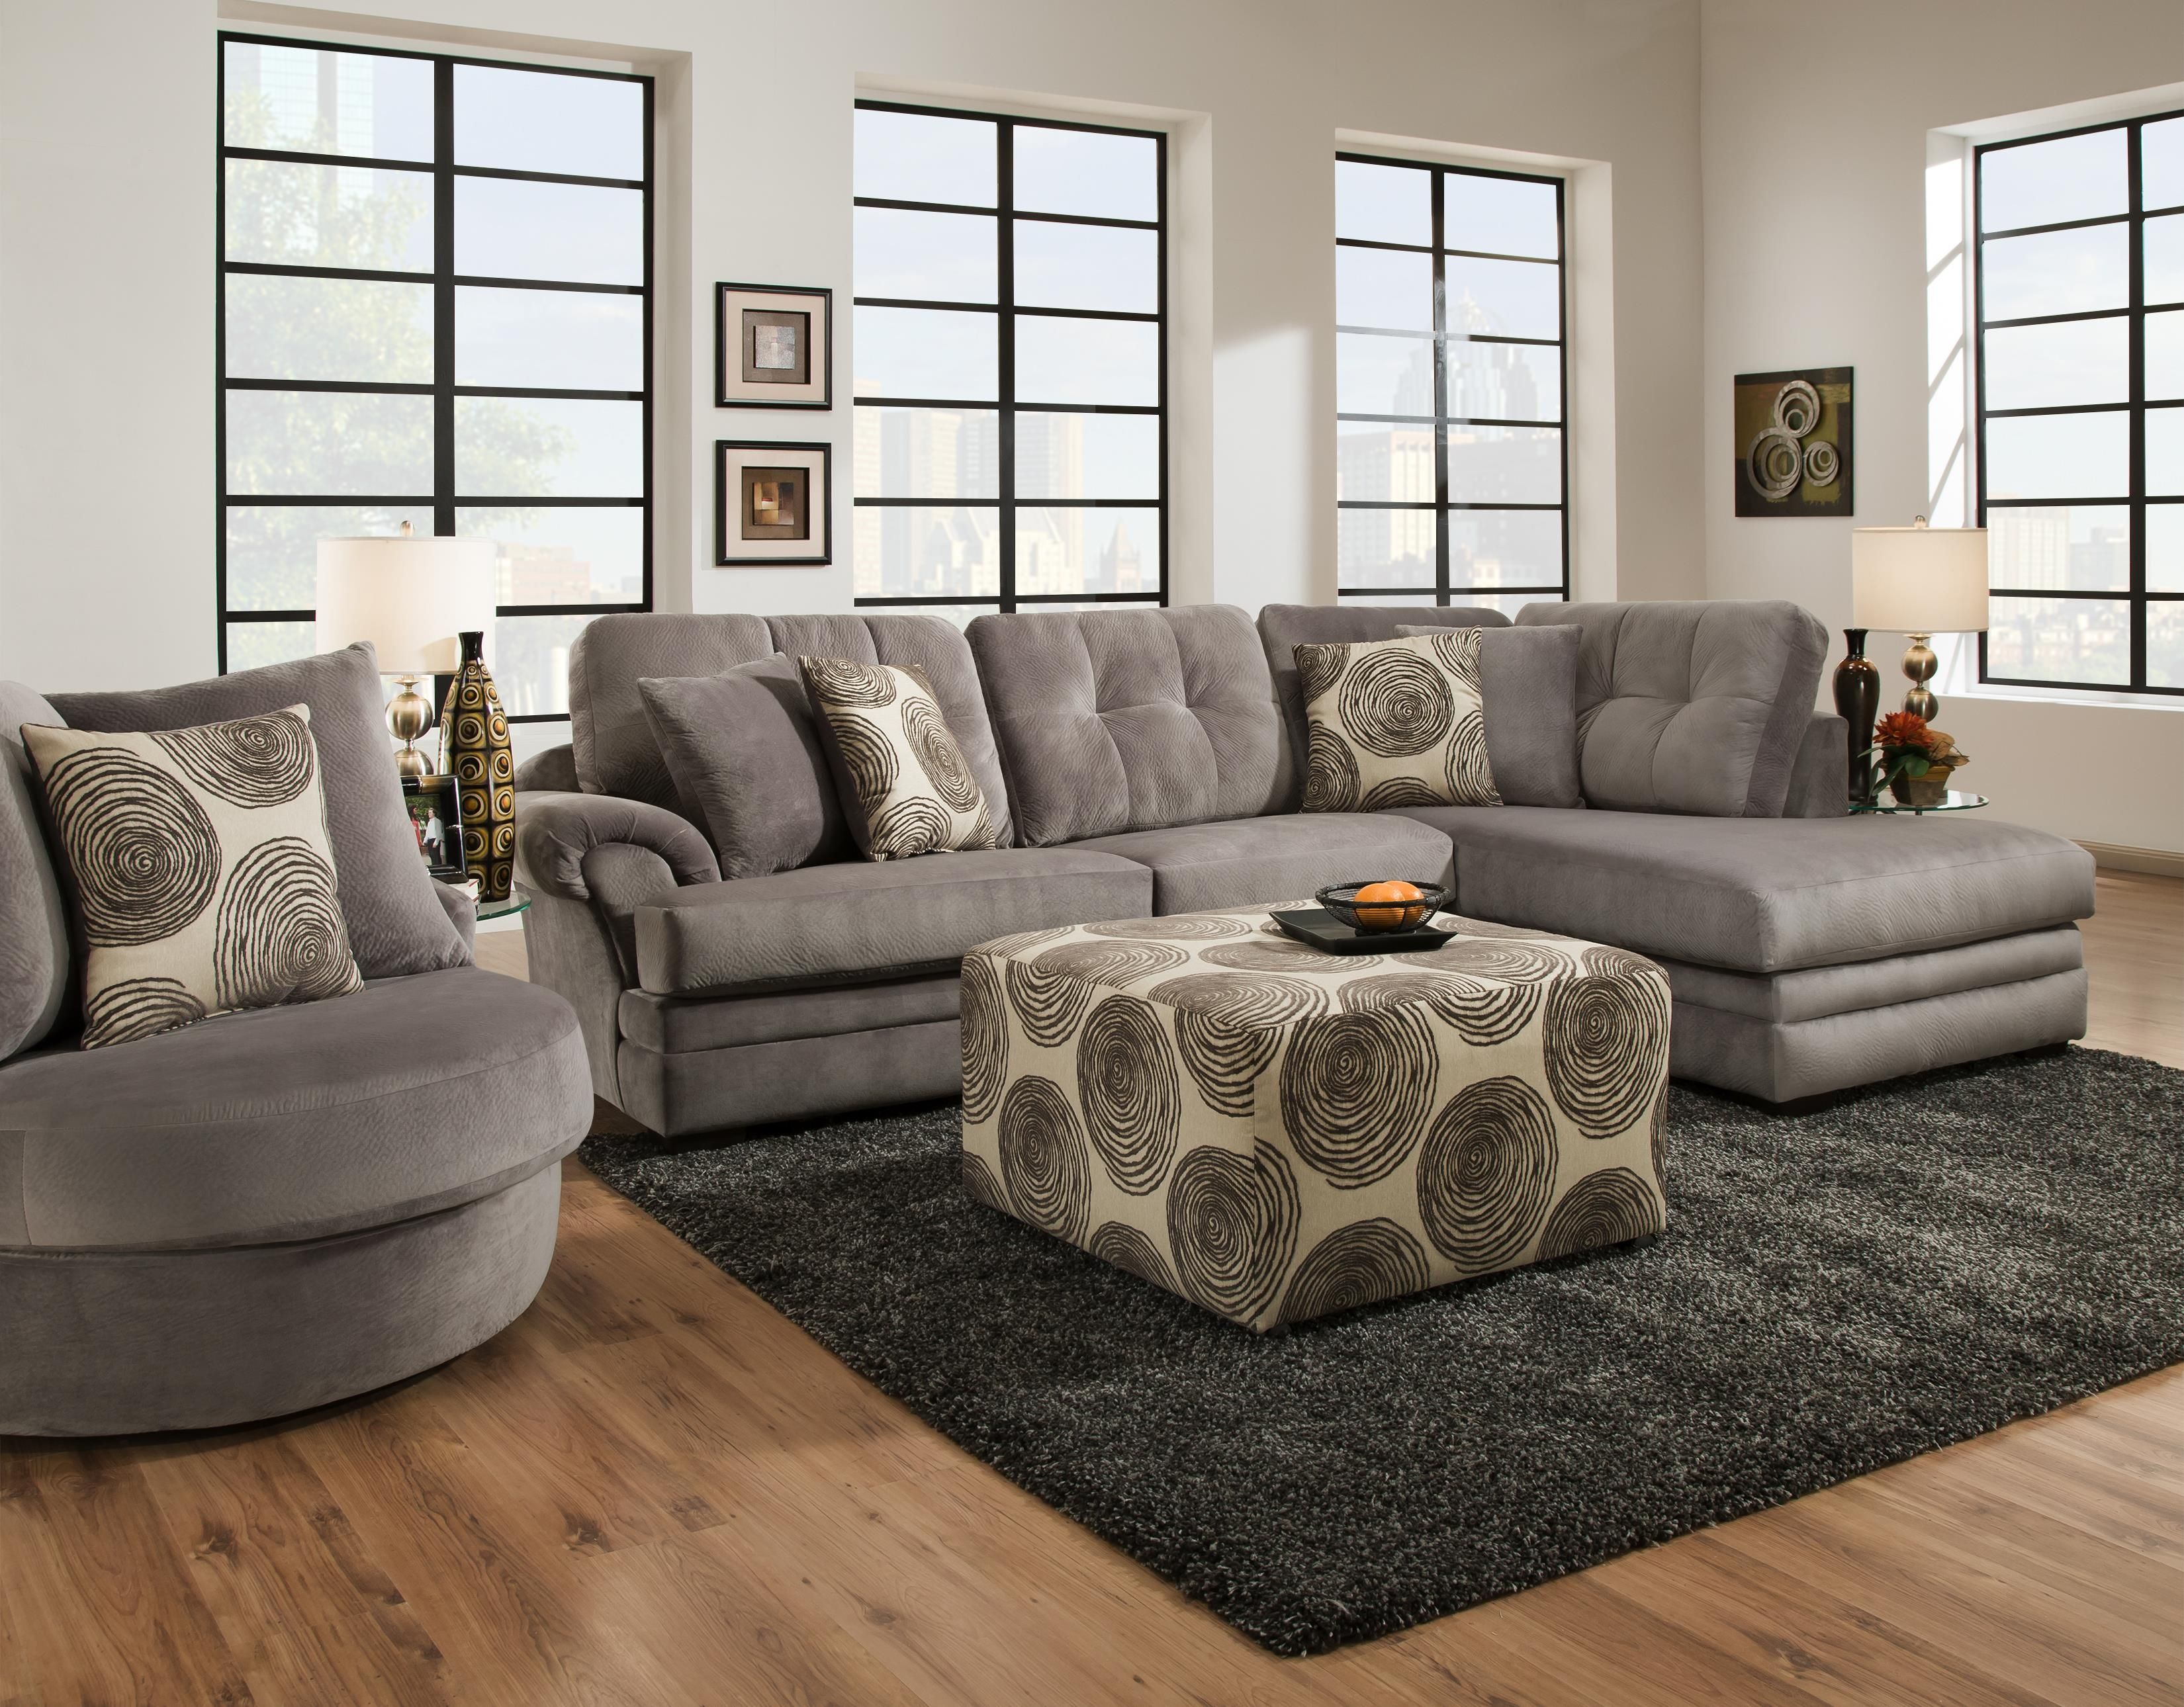 Sectional And Chair In Living Room